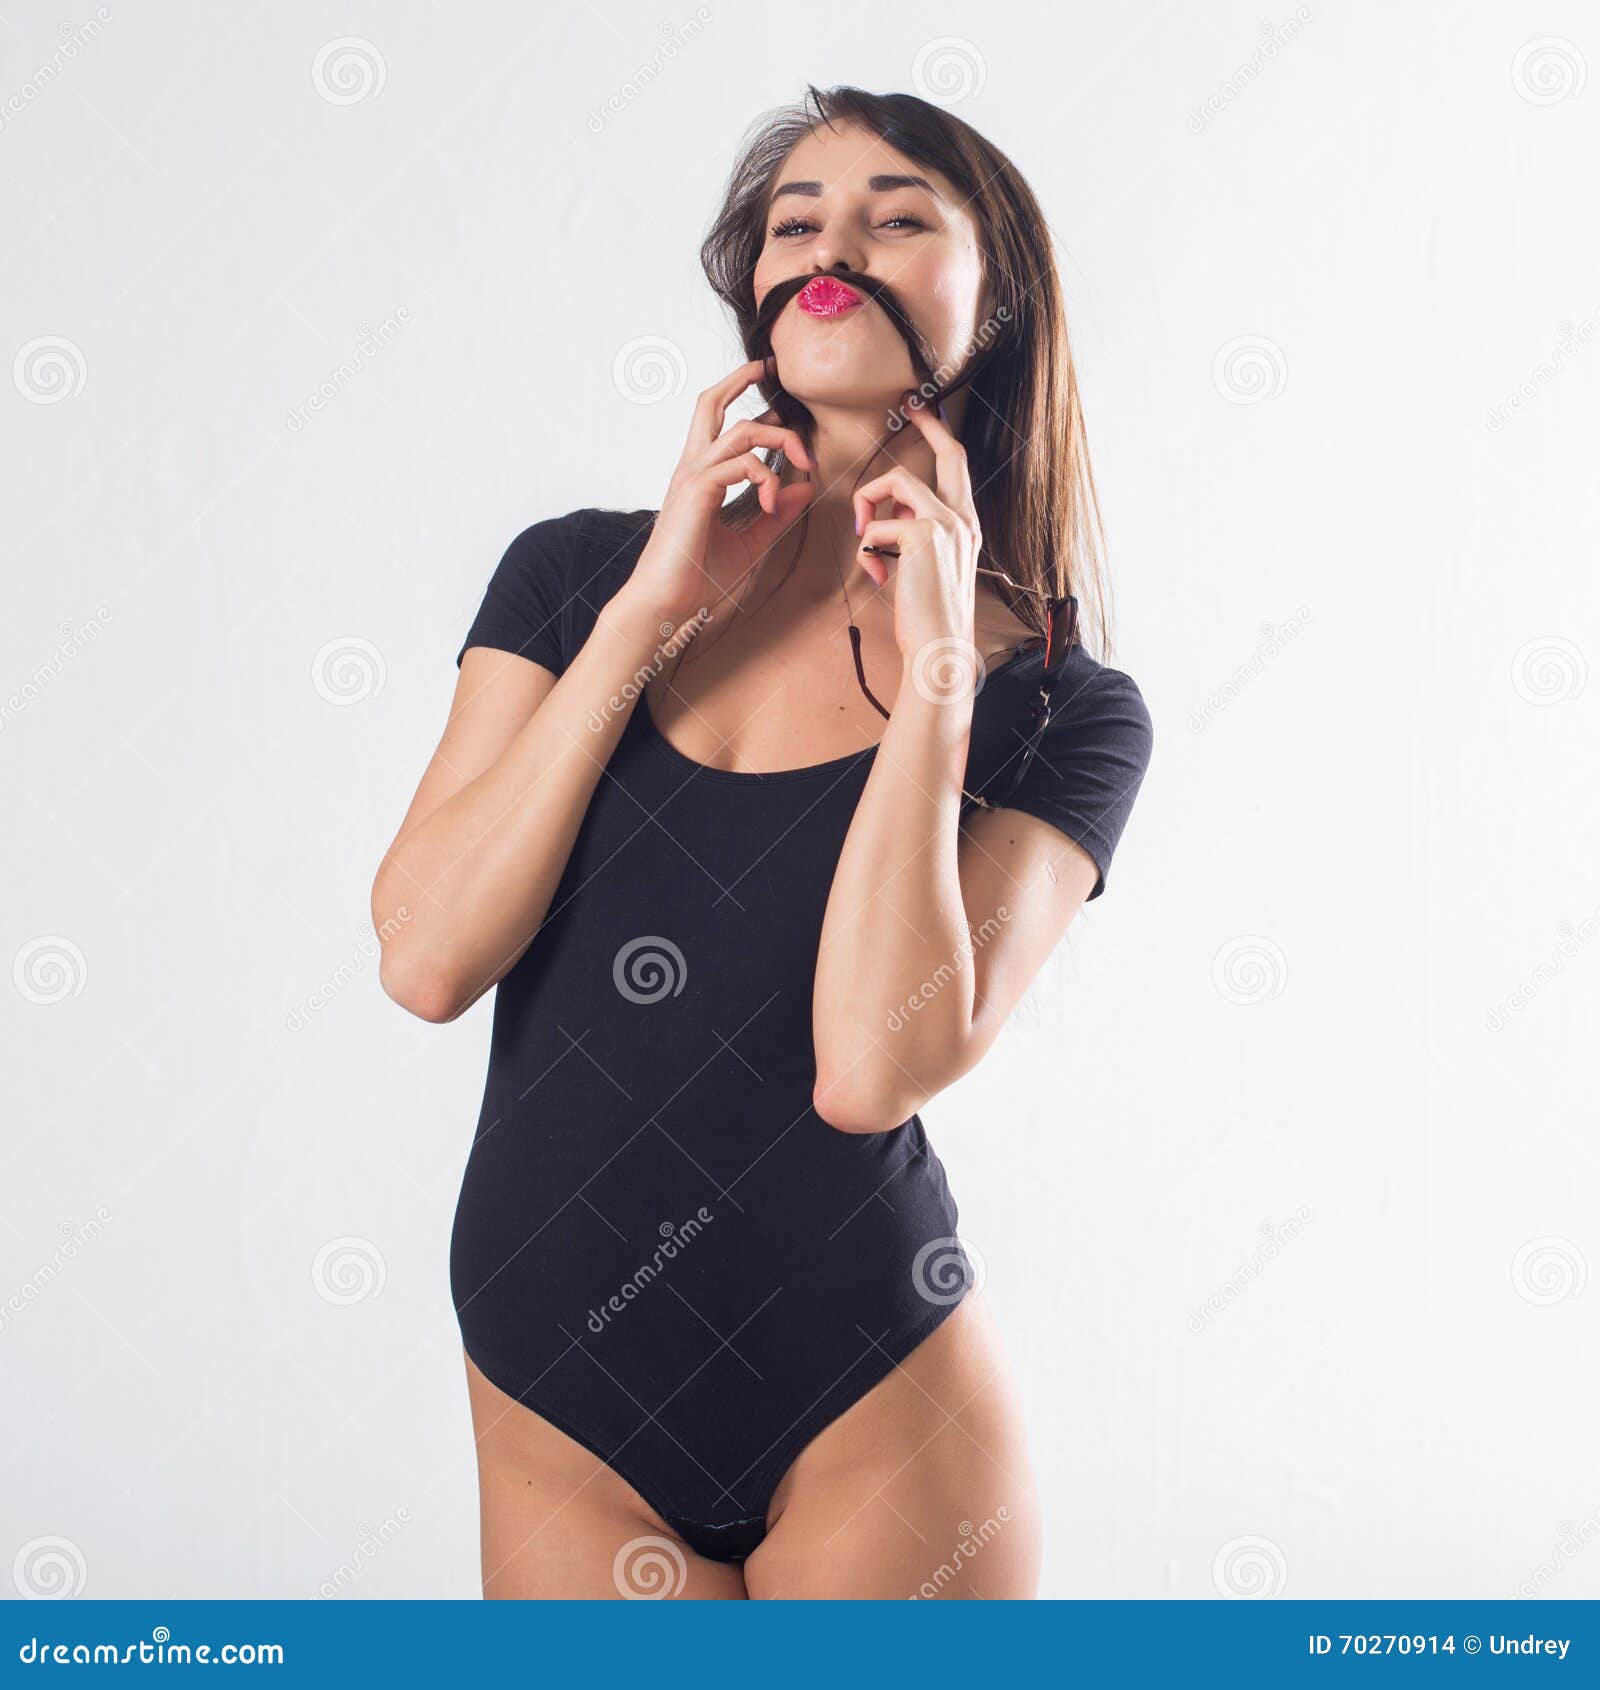 fit woman in black bodysuit holding hair strand, imitating, moustache, clowning, posing for a studio shot, not .